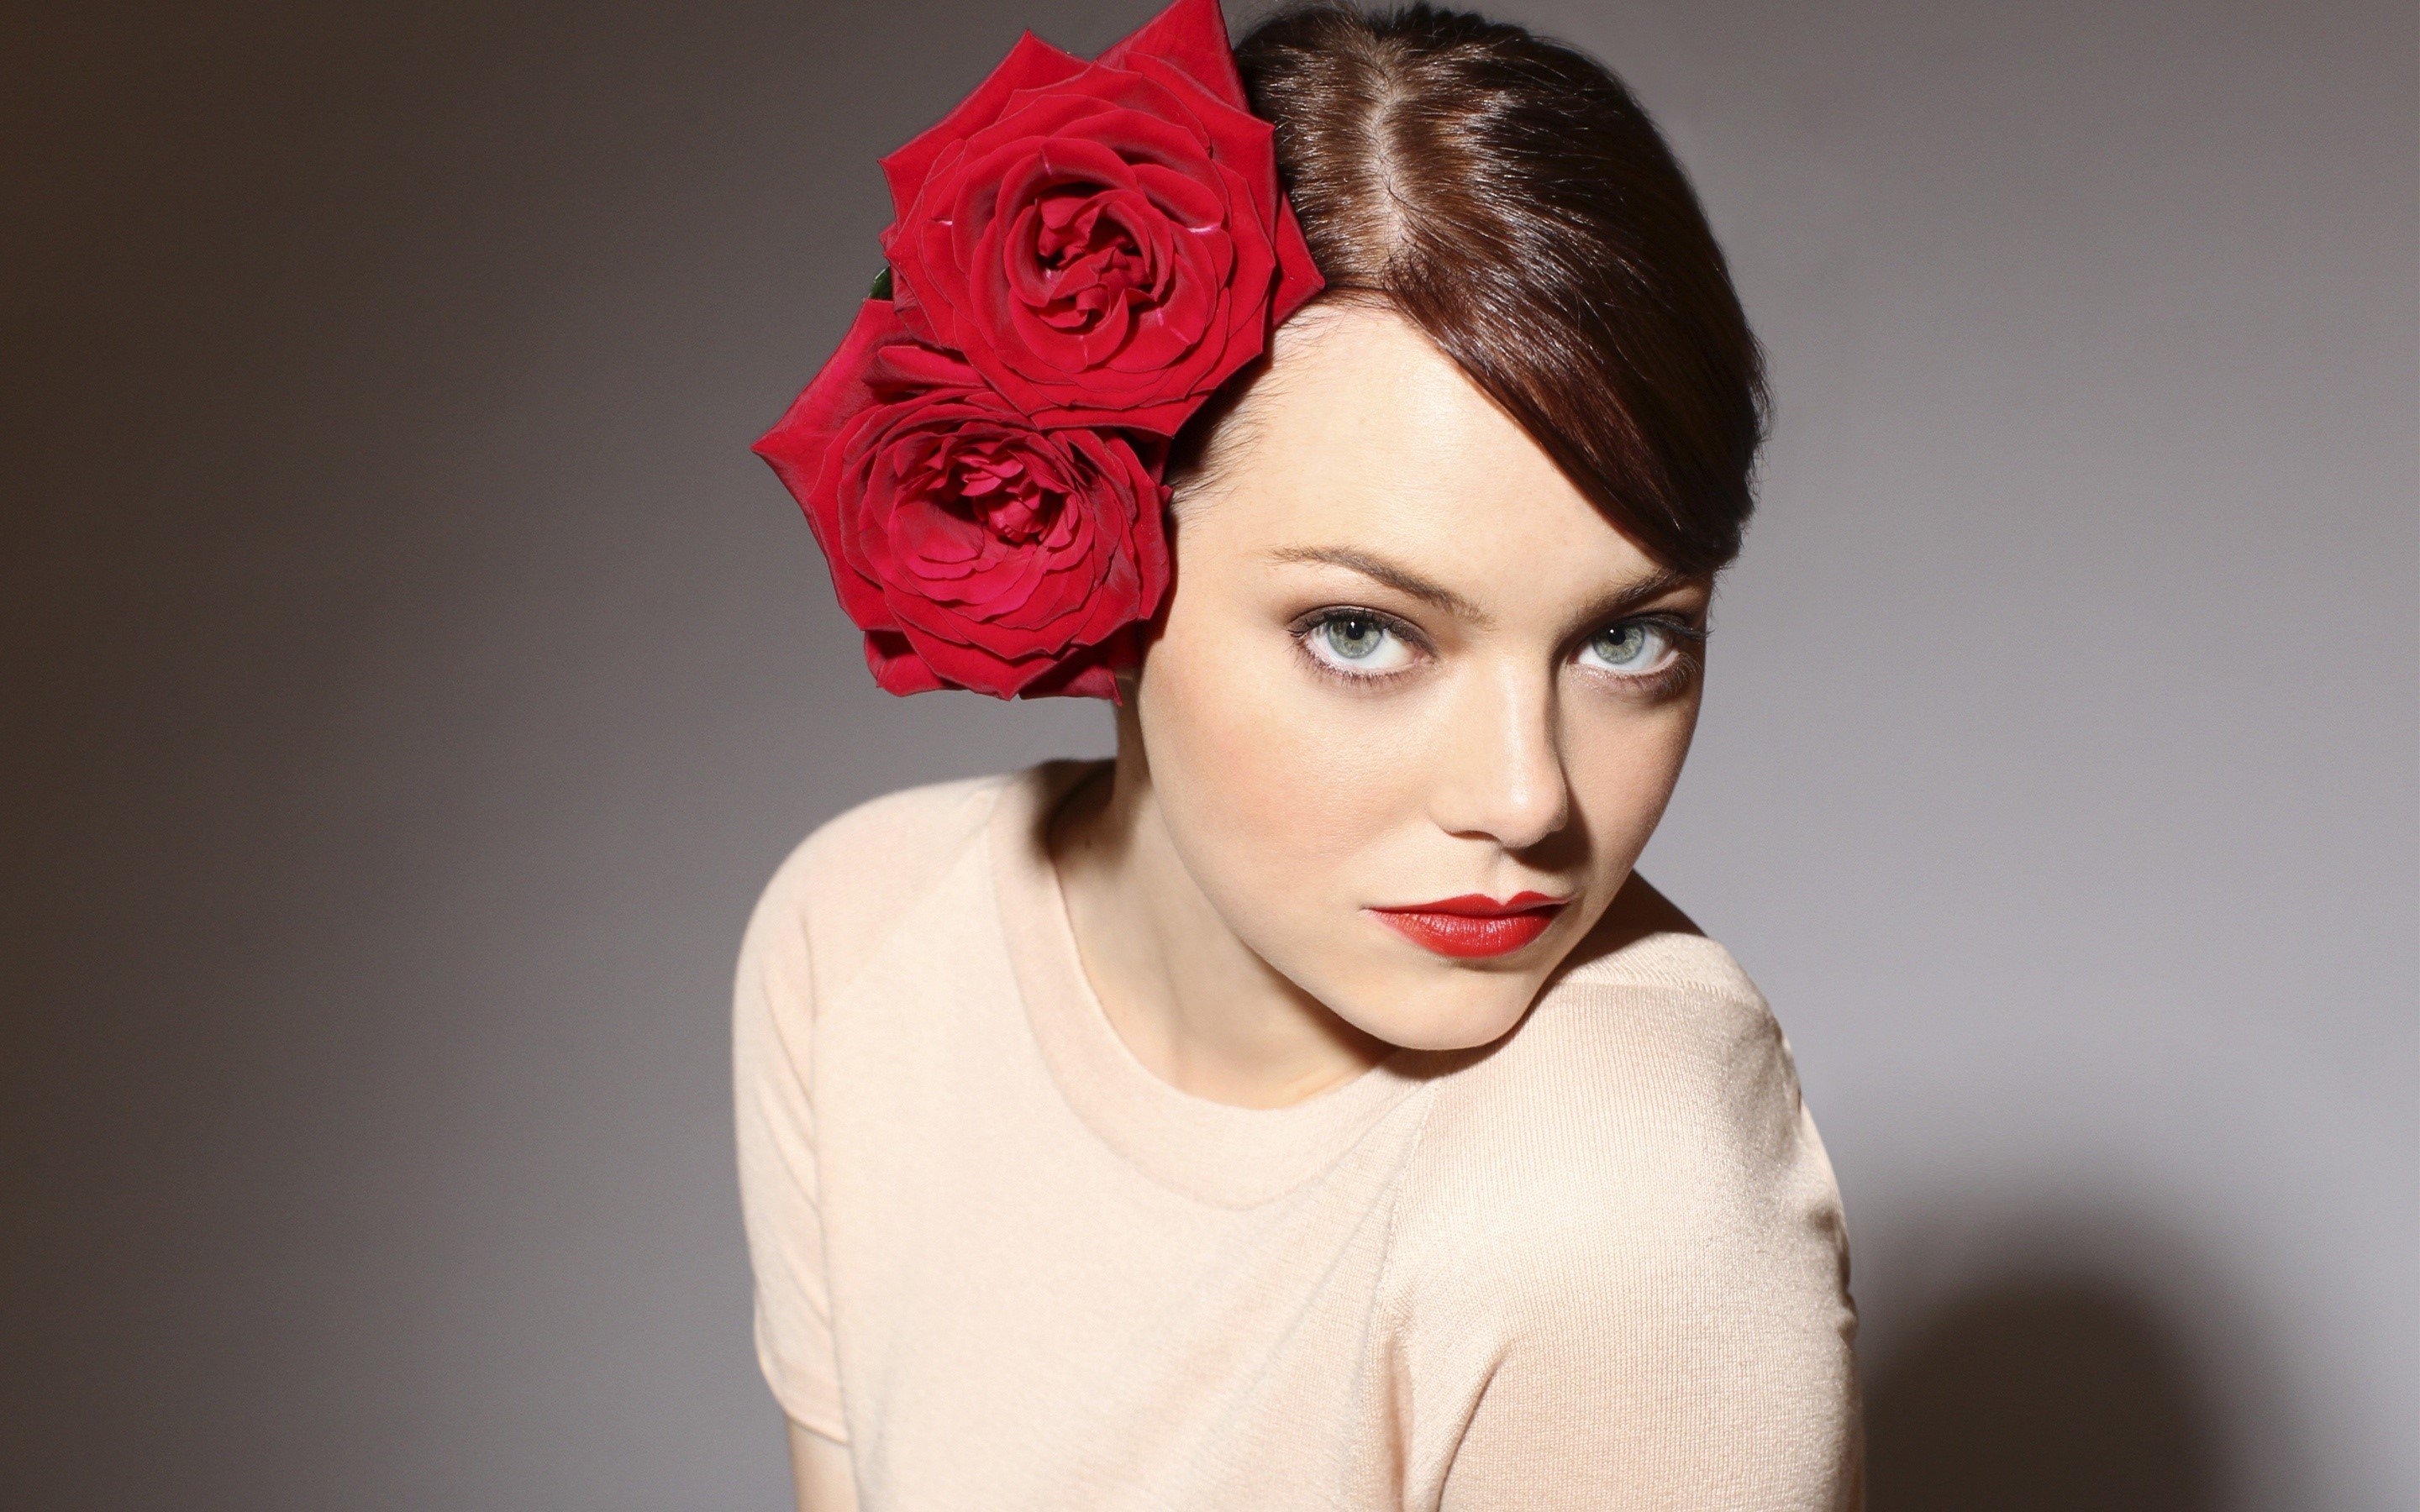 Wallpaper Emma Stone with a headdress of roses